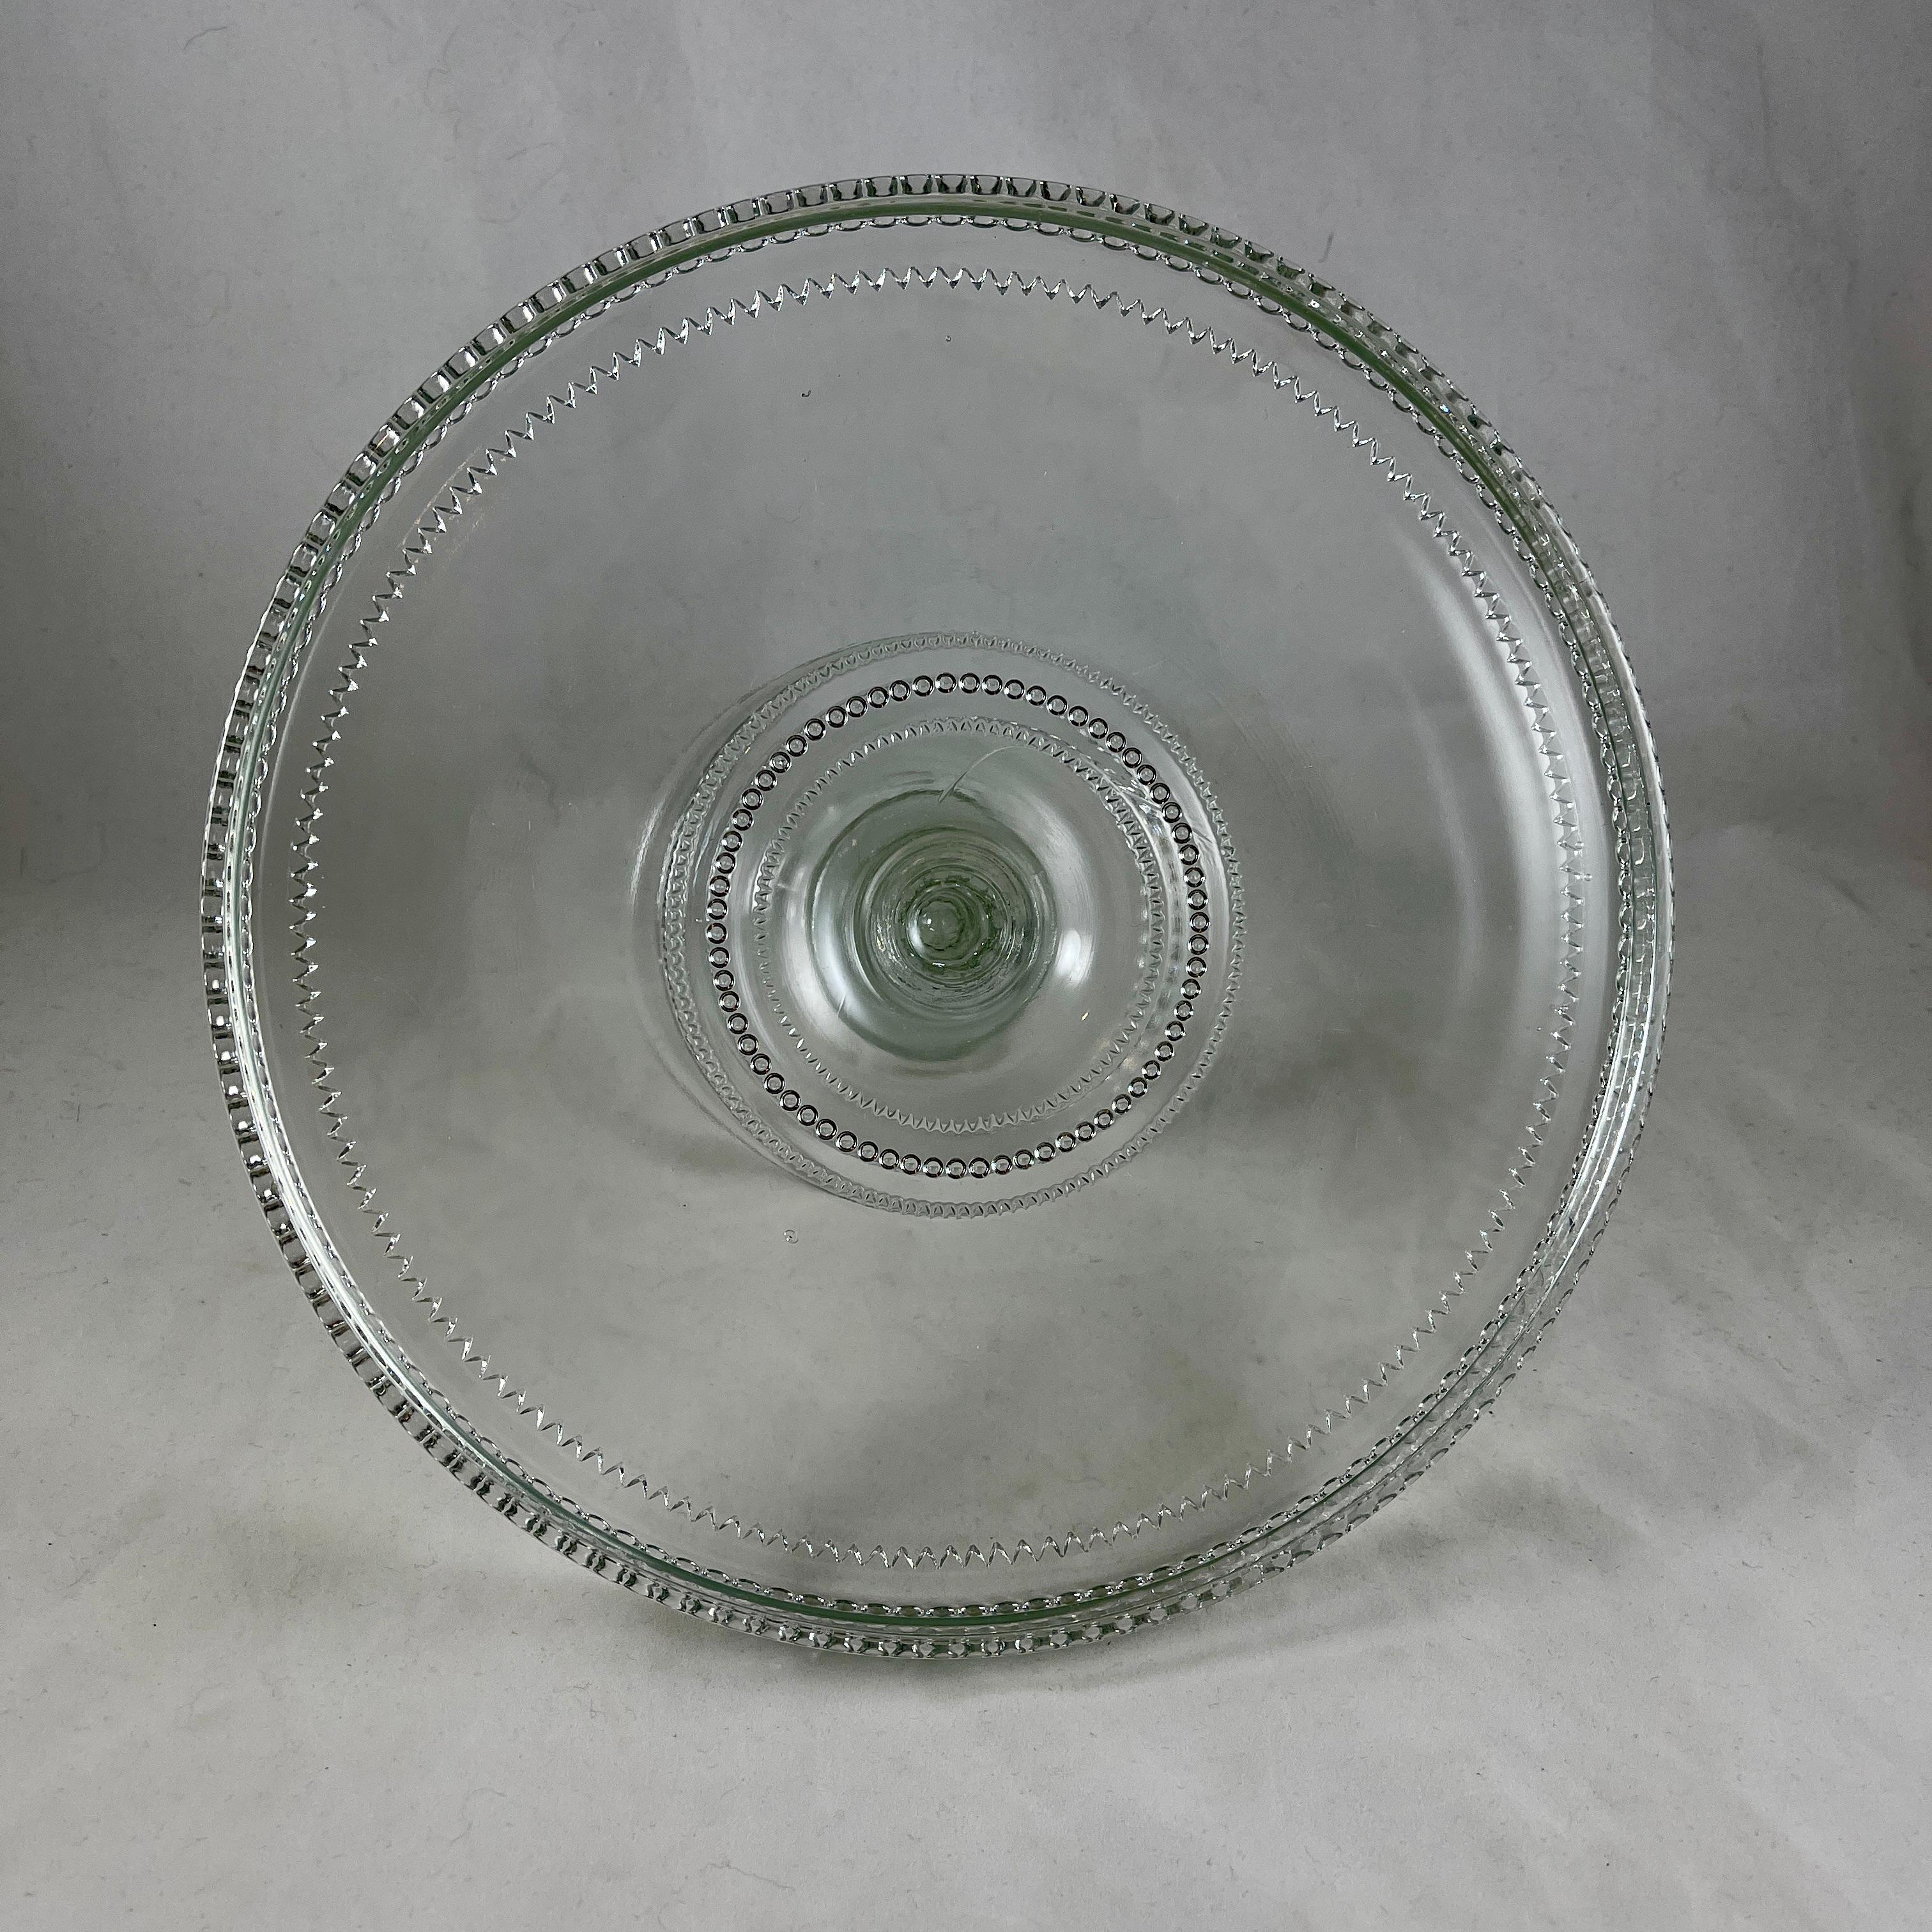 Early American Pressed Nonflint Colorless Glass Beaded Cake Stand 3